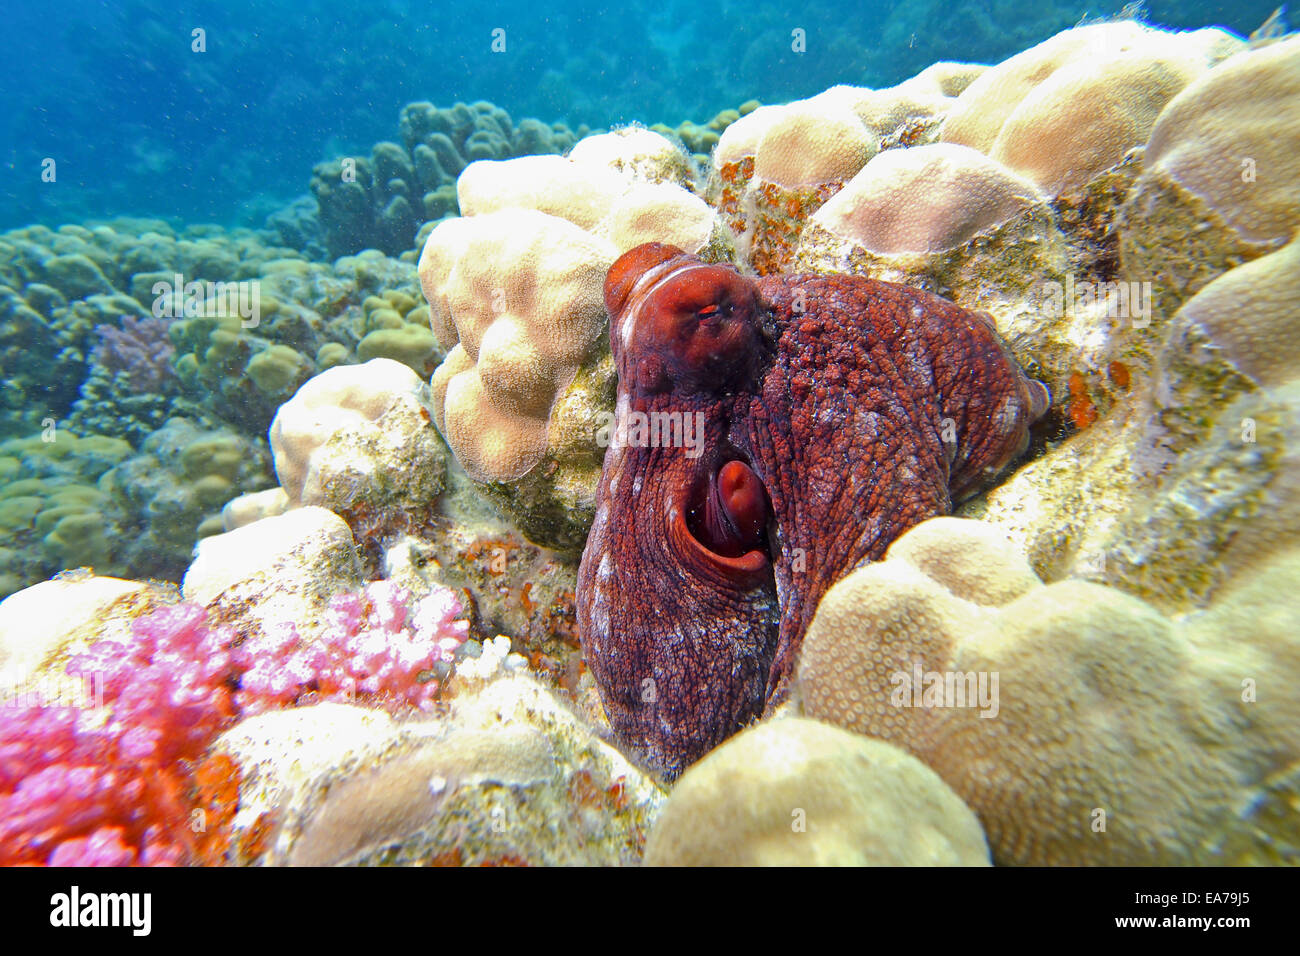 Big Red Octopus (Octopus cyaneus) hunting on a coral reef in the Red Sea Stock Photo